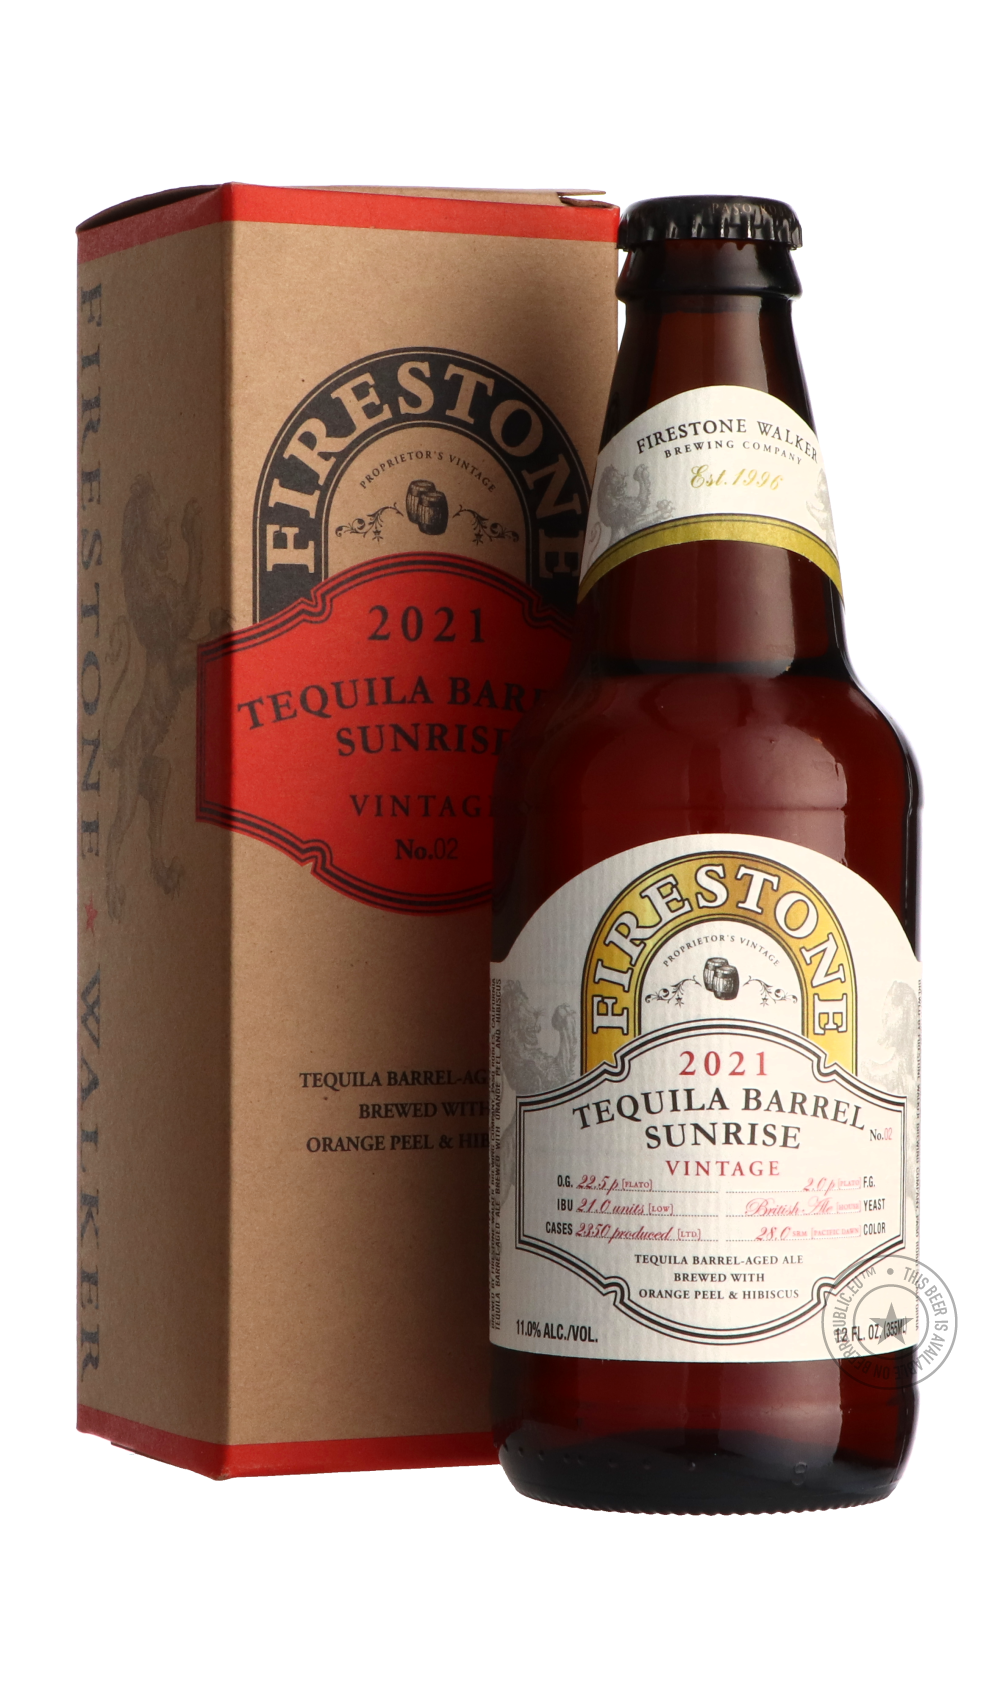 -Firestone Walker- Tequila Barrel Sunrise-Brown & Dark- Only @ Beer Republic - The best online beer store for American & Canadian craft beer - Buy beer online from the USA and Canada - Bier online kopen - Amerikaans bier kopen - Craft beer store - Craft beer kopen - Amerikanisch bier kaufen - Bier online kaufen - Acheter biere online - IPA - Stout - Porter - New England IPA - Hazy IPA - Imperial Stout - Barrel Aged - Barrel Aged Imperial Stout - Brown - Dark beer - Blond - Blonde - Pilsner - Lager - Wheat -